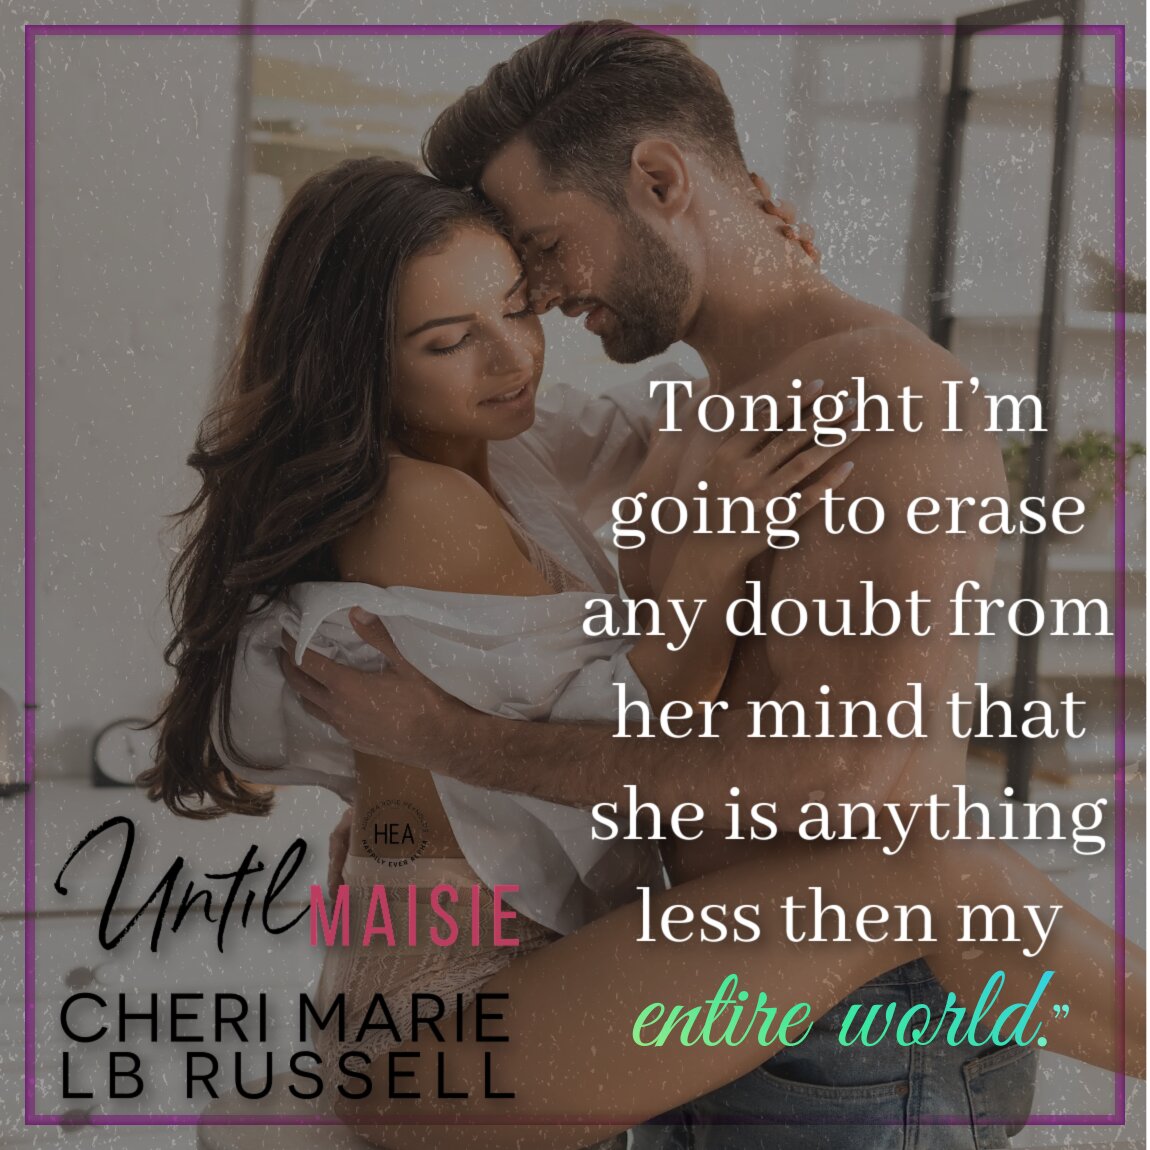 #NEW #KU Sawyer Prescott was my first love, but he’s far from the boy I fell for ten years ago. Until Maisie by Cheri Marie & LB Russell @boomfactorypub amzn.to/3l3Hx8W